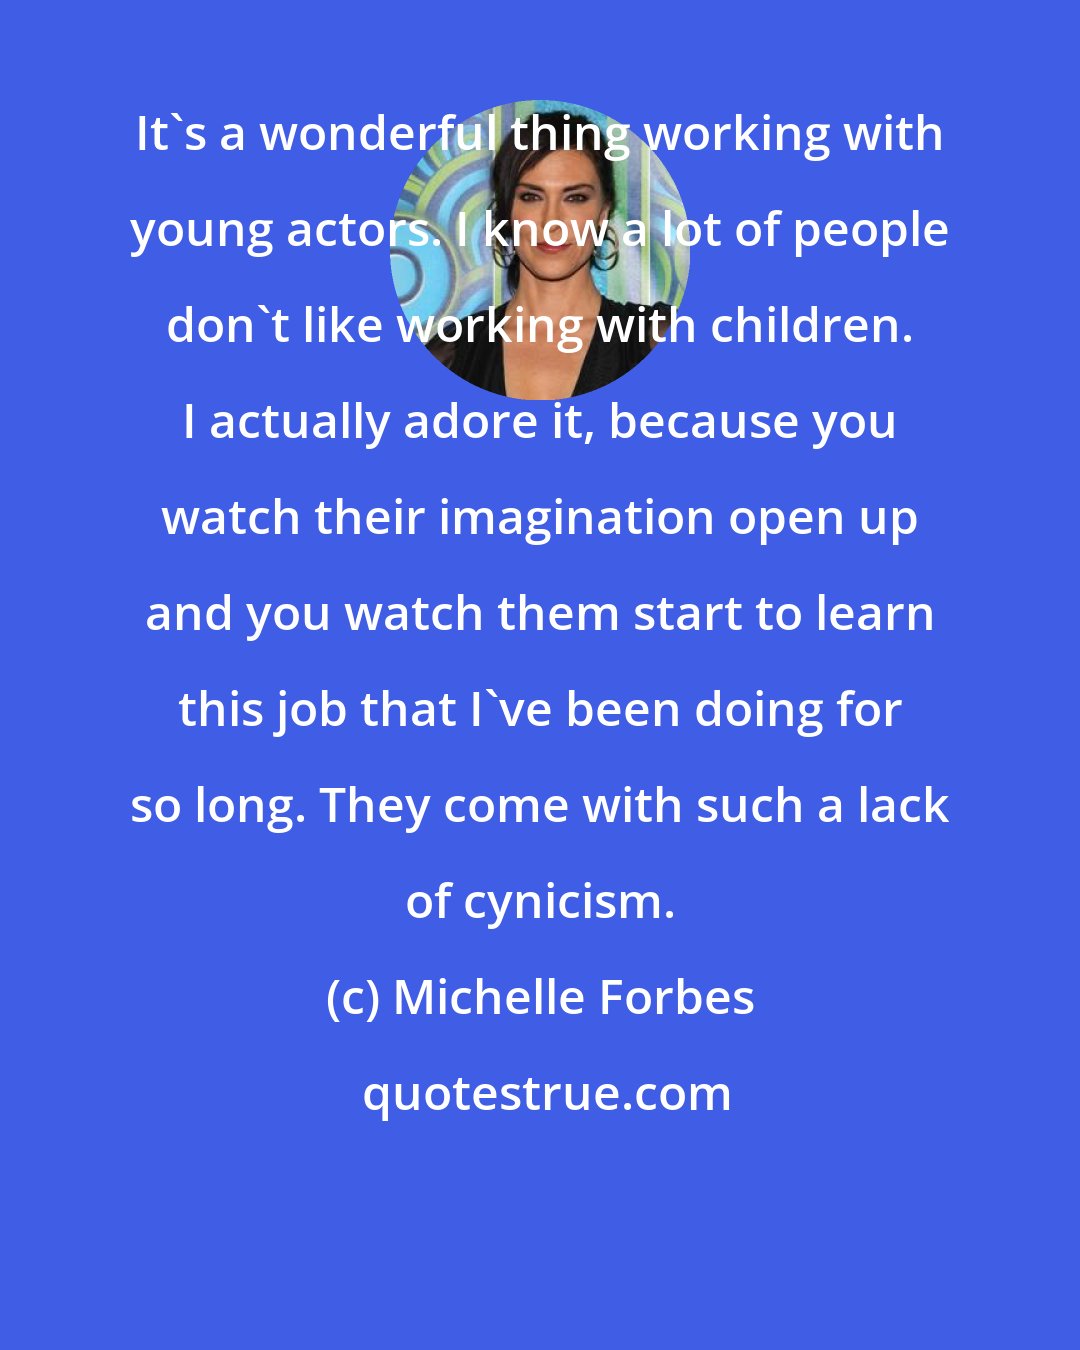 Michelle Forbes: It's a wonderful thing working with young actors. I know a lot of people don't like working with children. I actually adore it, because you watch their imagination open up and you watch them start to learn this job that I've been doing for so long. They come with such a lack of cynicism.